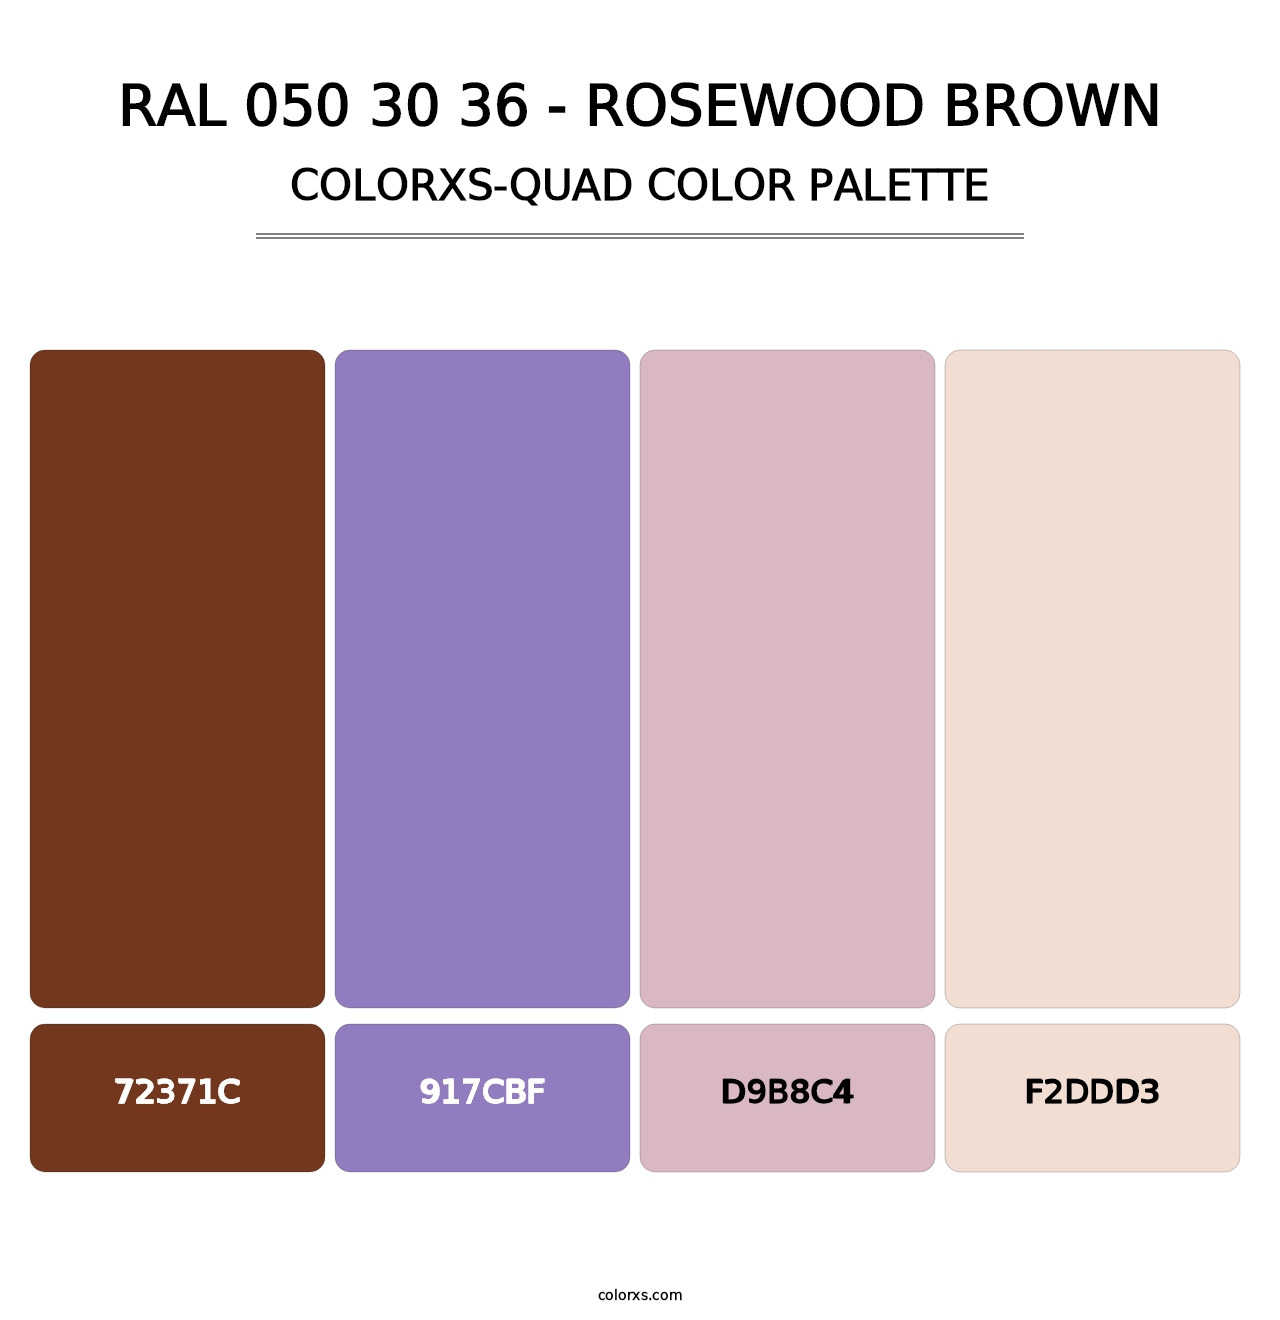 RAL 050 30 36 - Rosewood Brown - Colorxs Quad Palette